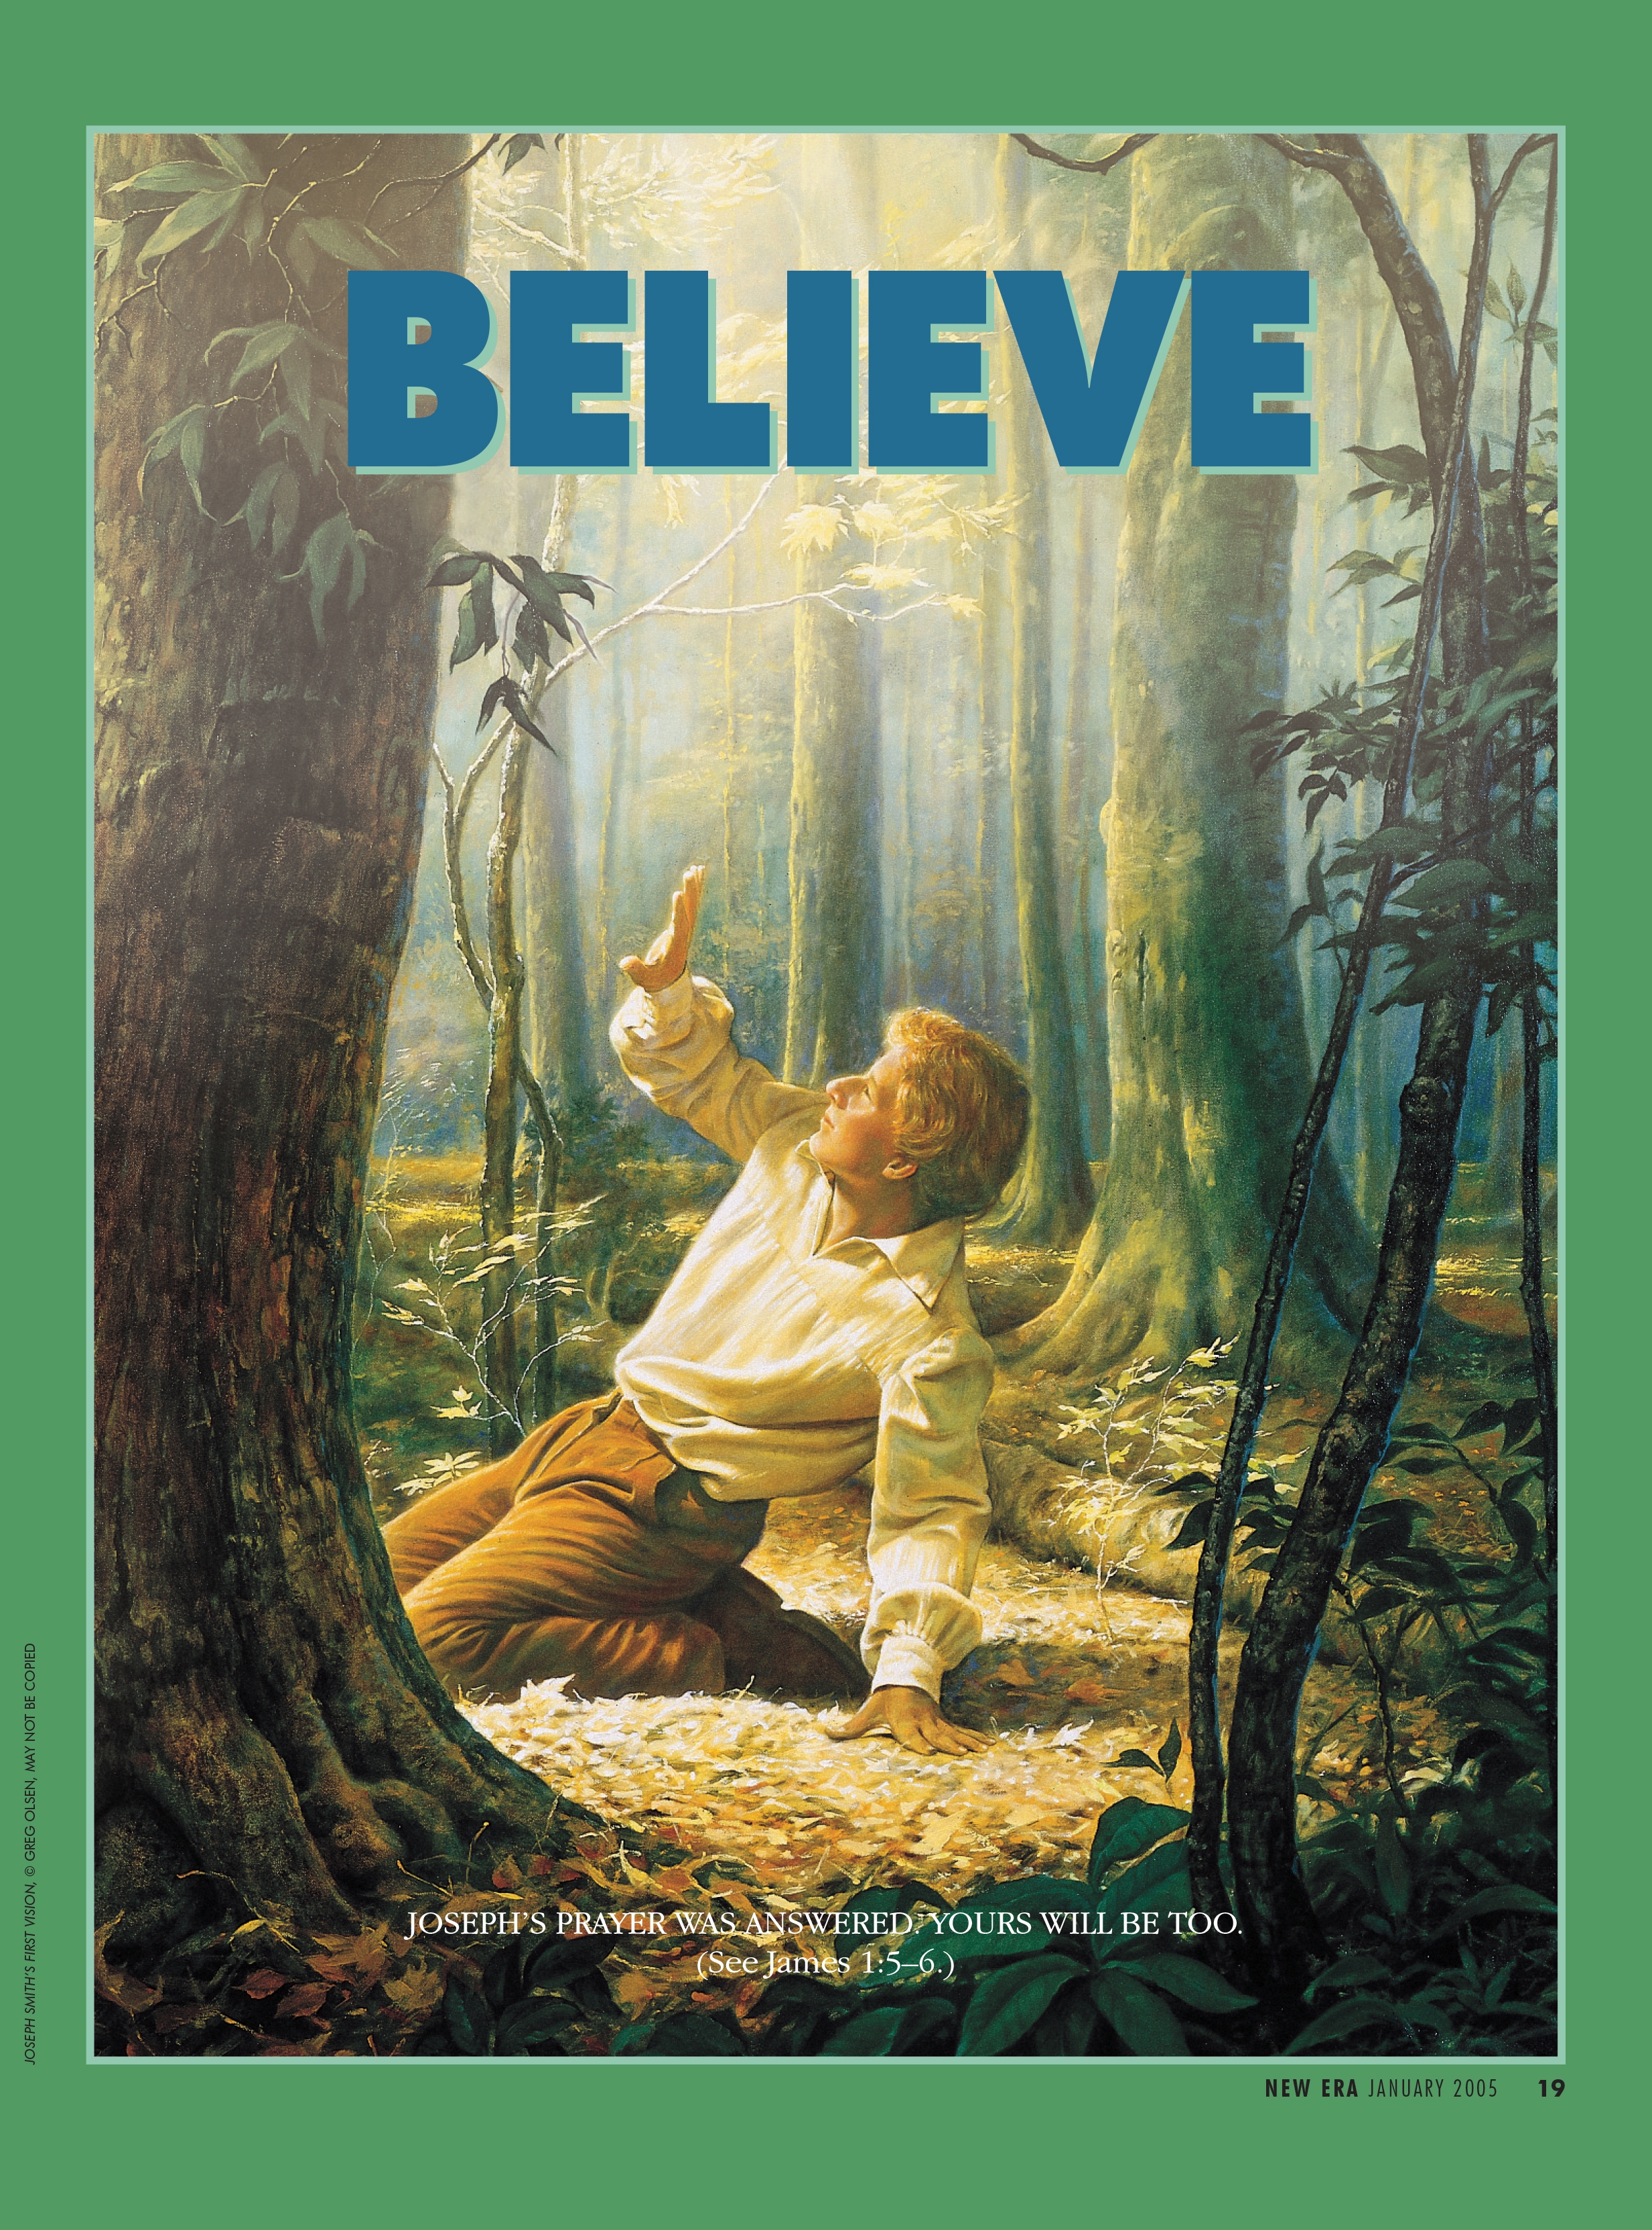 A painting of Joseph Smith in the Sacred Grove, paired with the words “Believe."